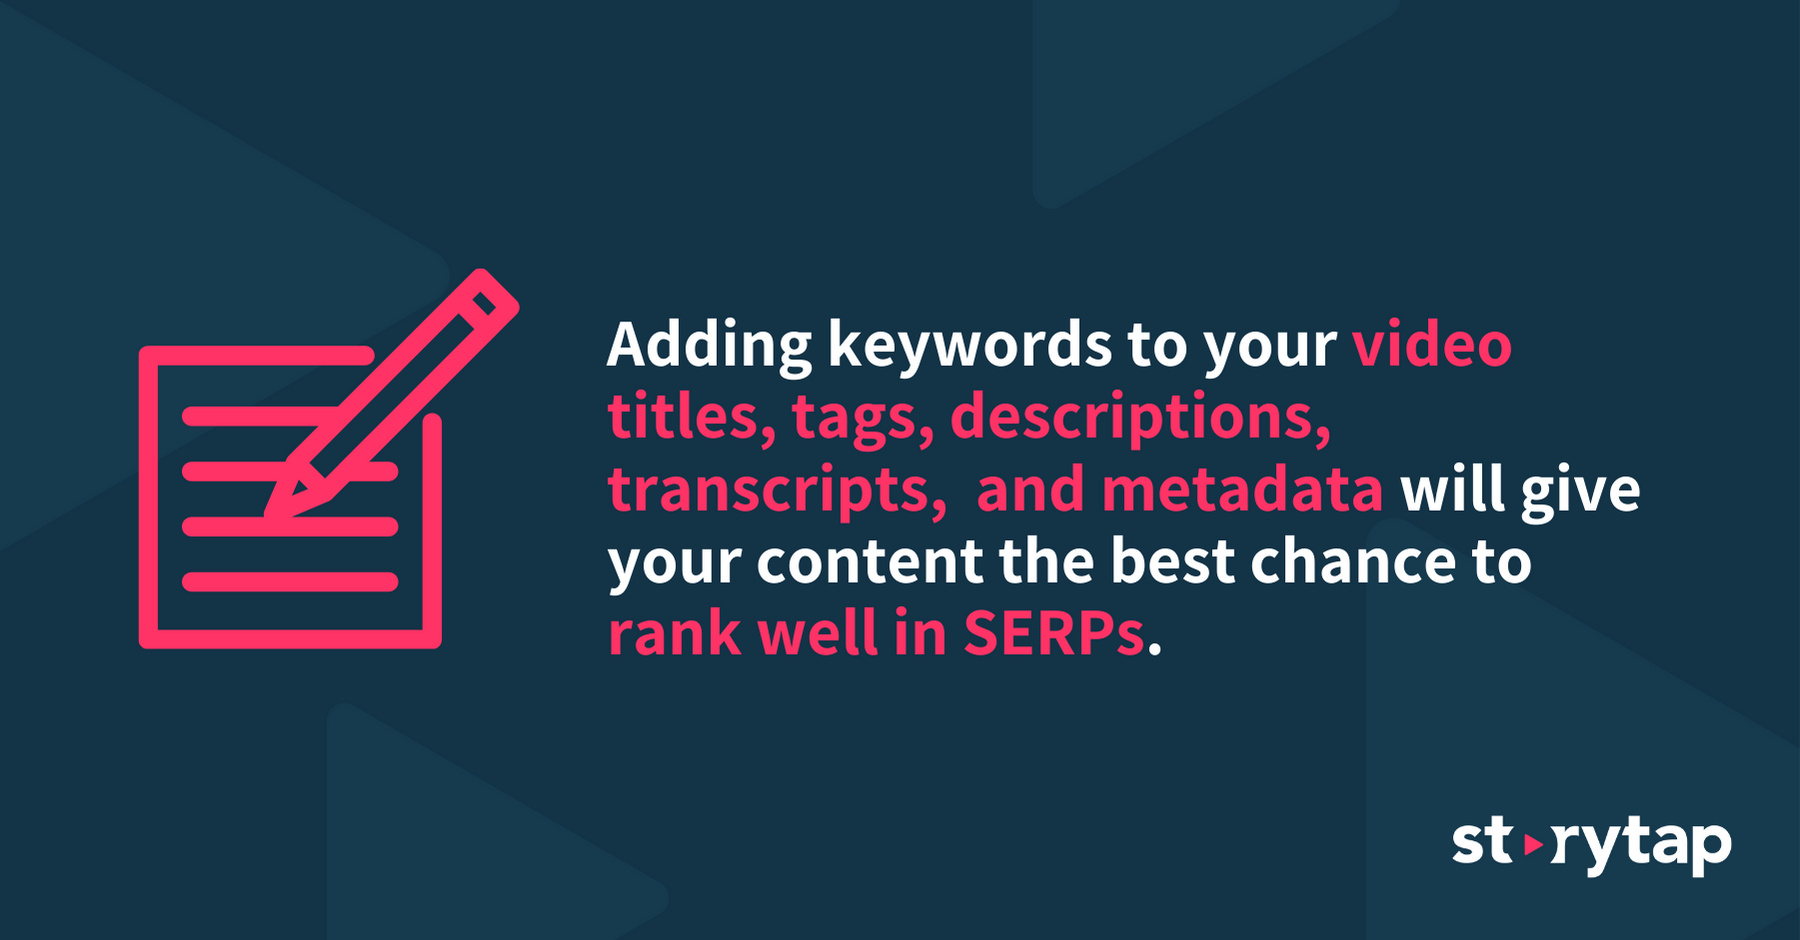 Adding keywords to your video titles, tags, descriptions, transcripts and metadata will give your content the best chance to rank well in SERPs.